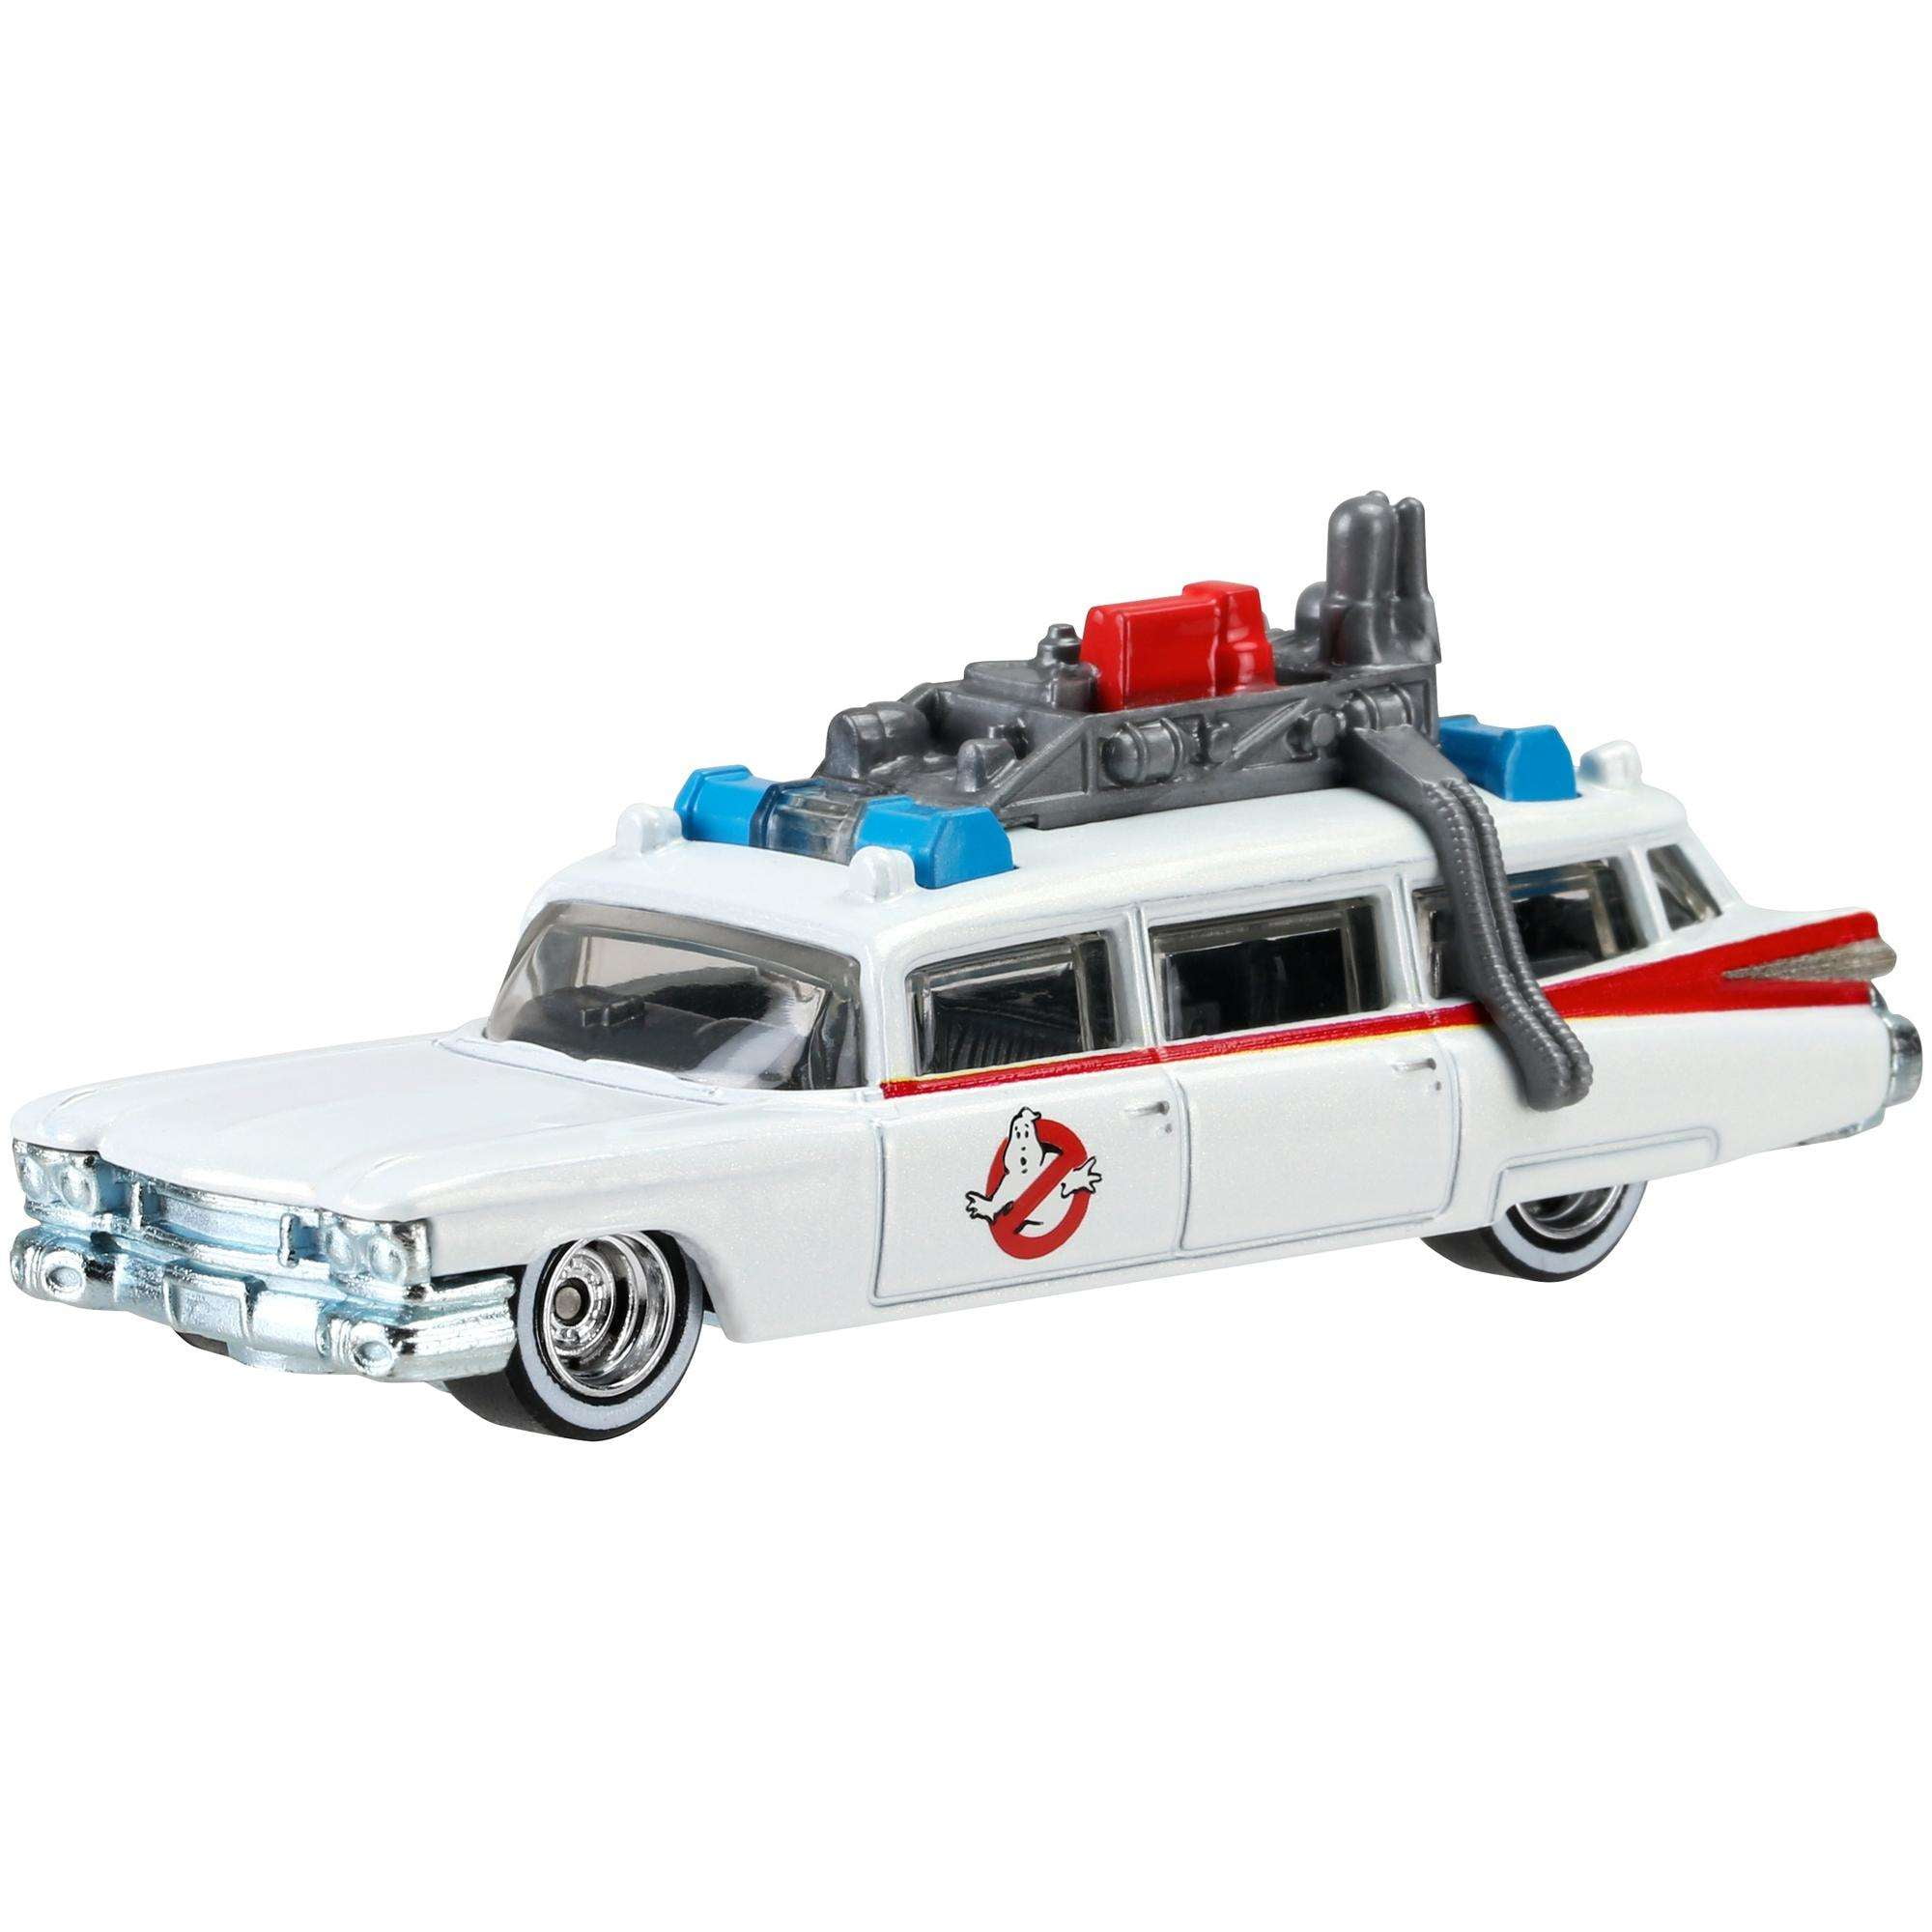 2020 GJR39 for sale online Car Hot Wheels 1:64 Scale Ghostbusters ECTO-1 